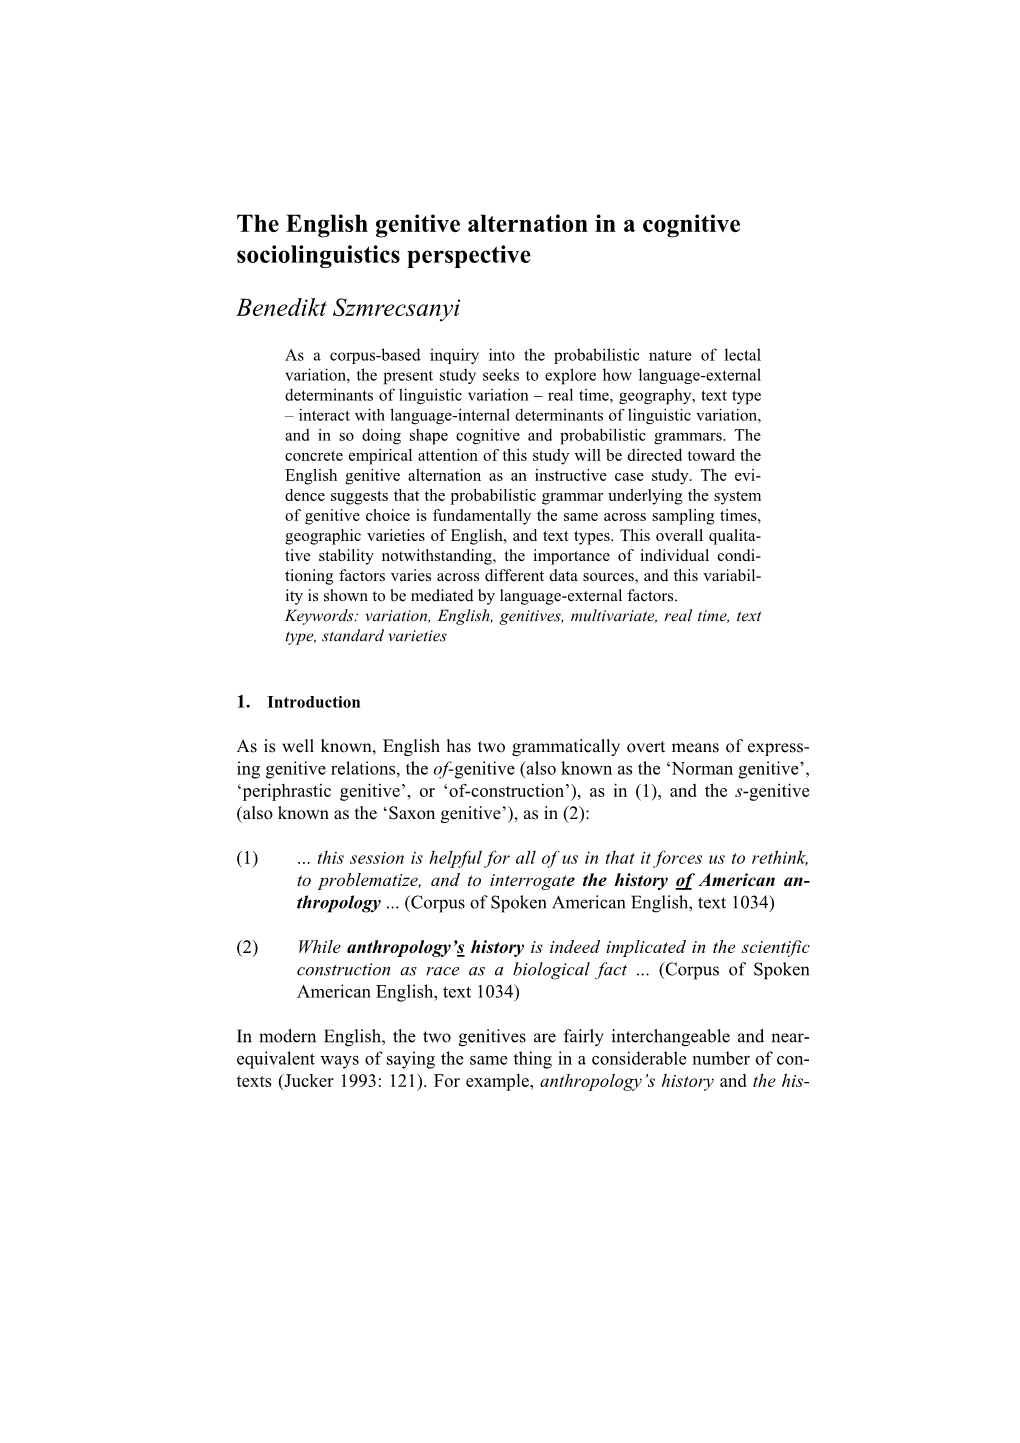 The English Genitive Alternation in a Cognitive Sociolinguistics Perspective